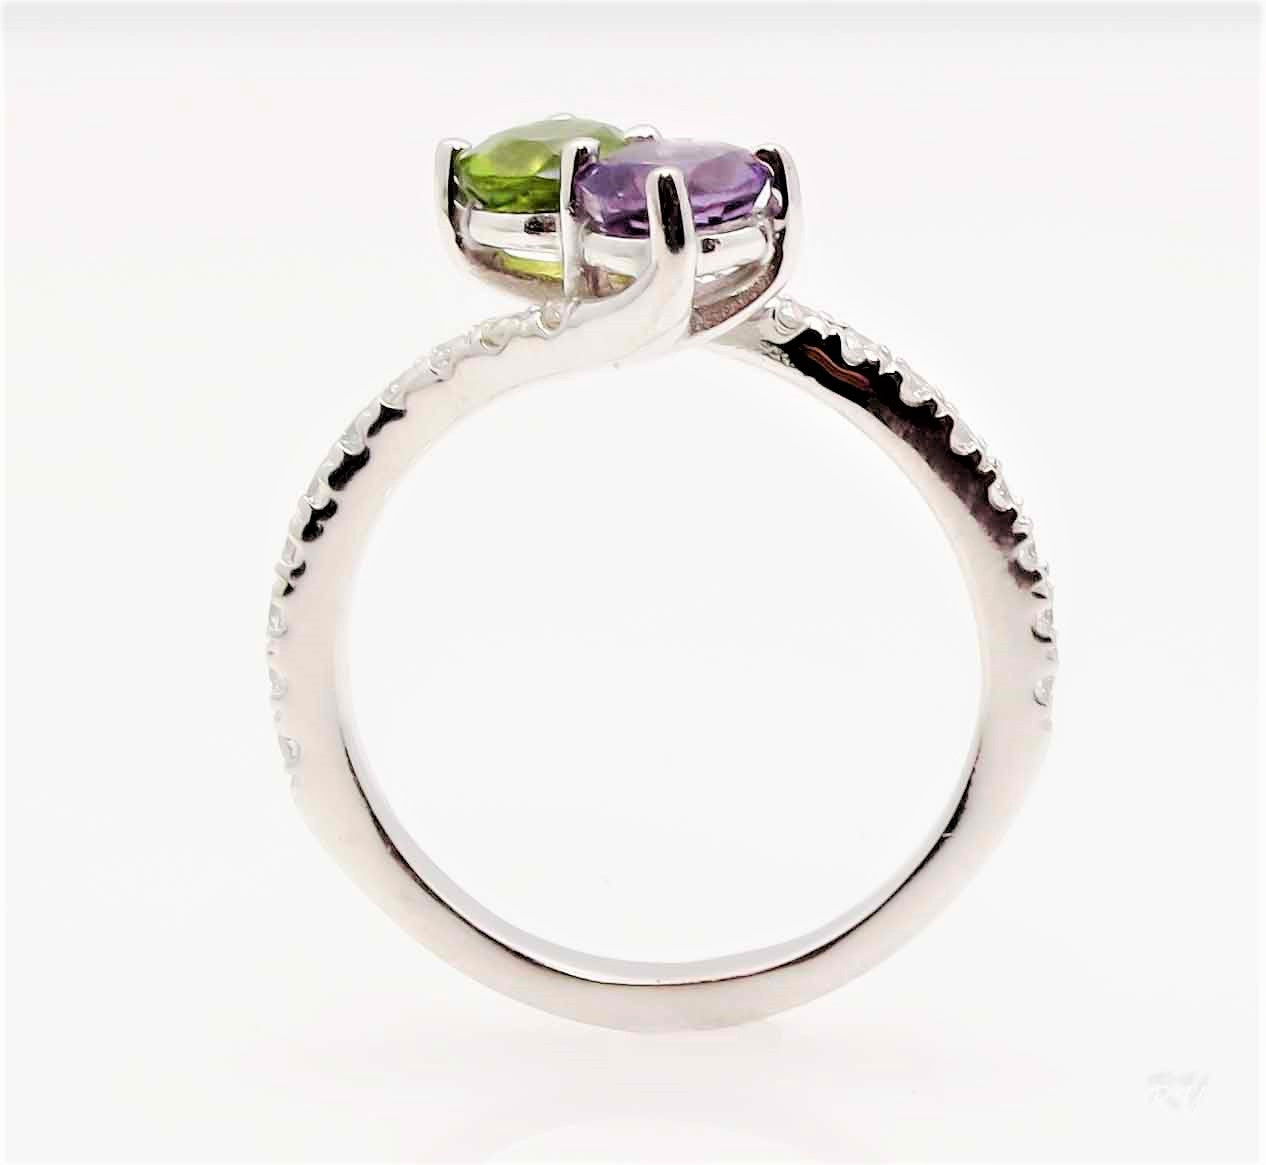 Two Stone Ring With  5 mm (0.5 carat) Amethyst And 5 mm (0.5 carat) Peridot Gemstones With 0.30 Carats Of Diamonds - UBS4984E